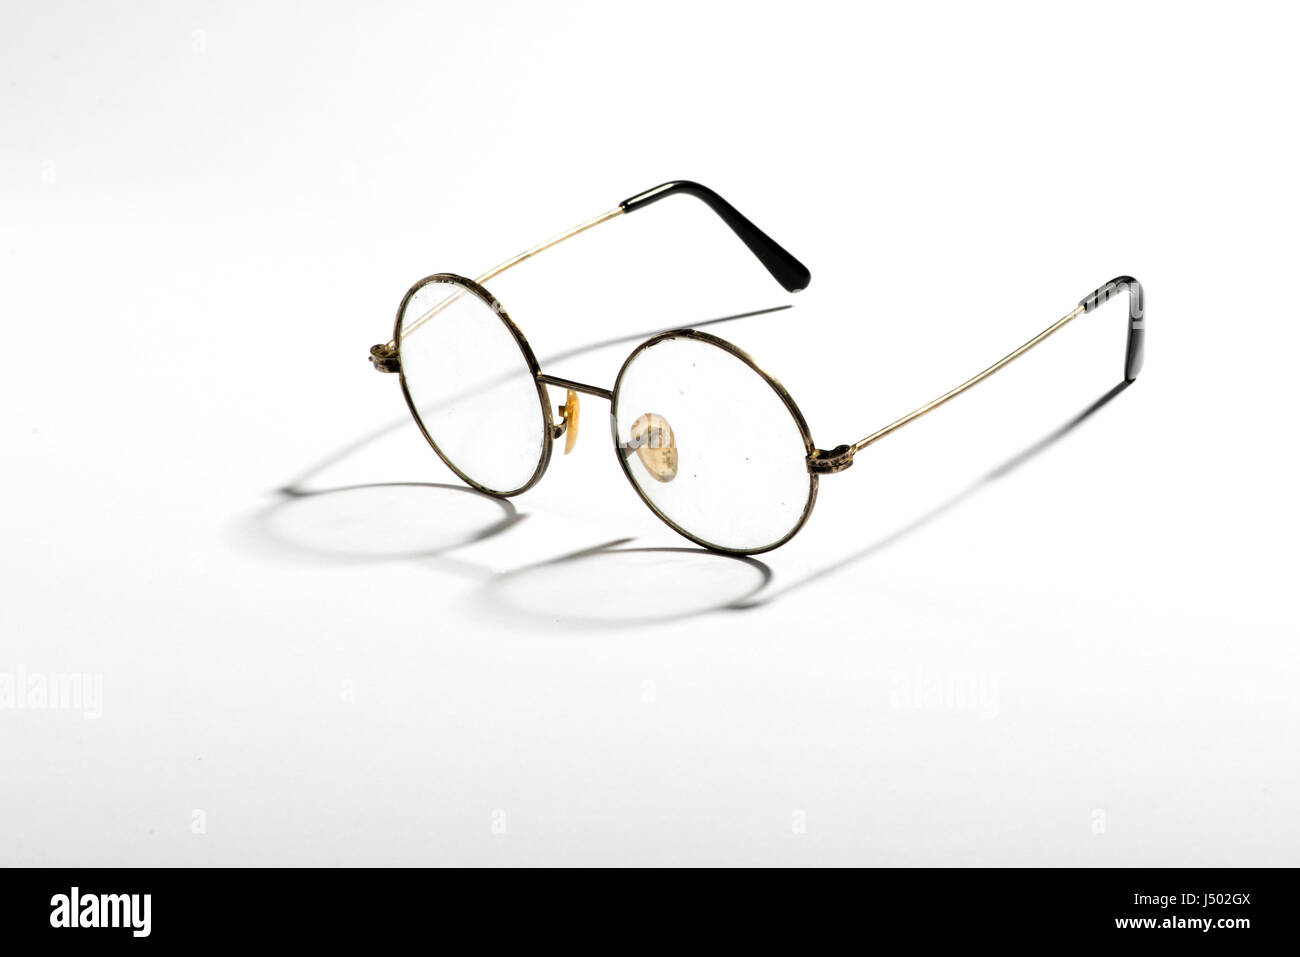 Pair of old vintage spectacles with wire frames and round lenses ...